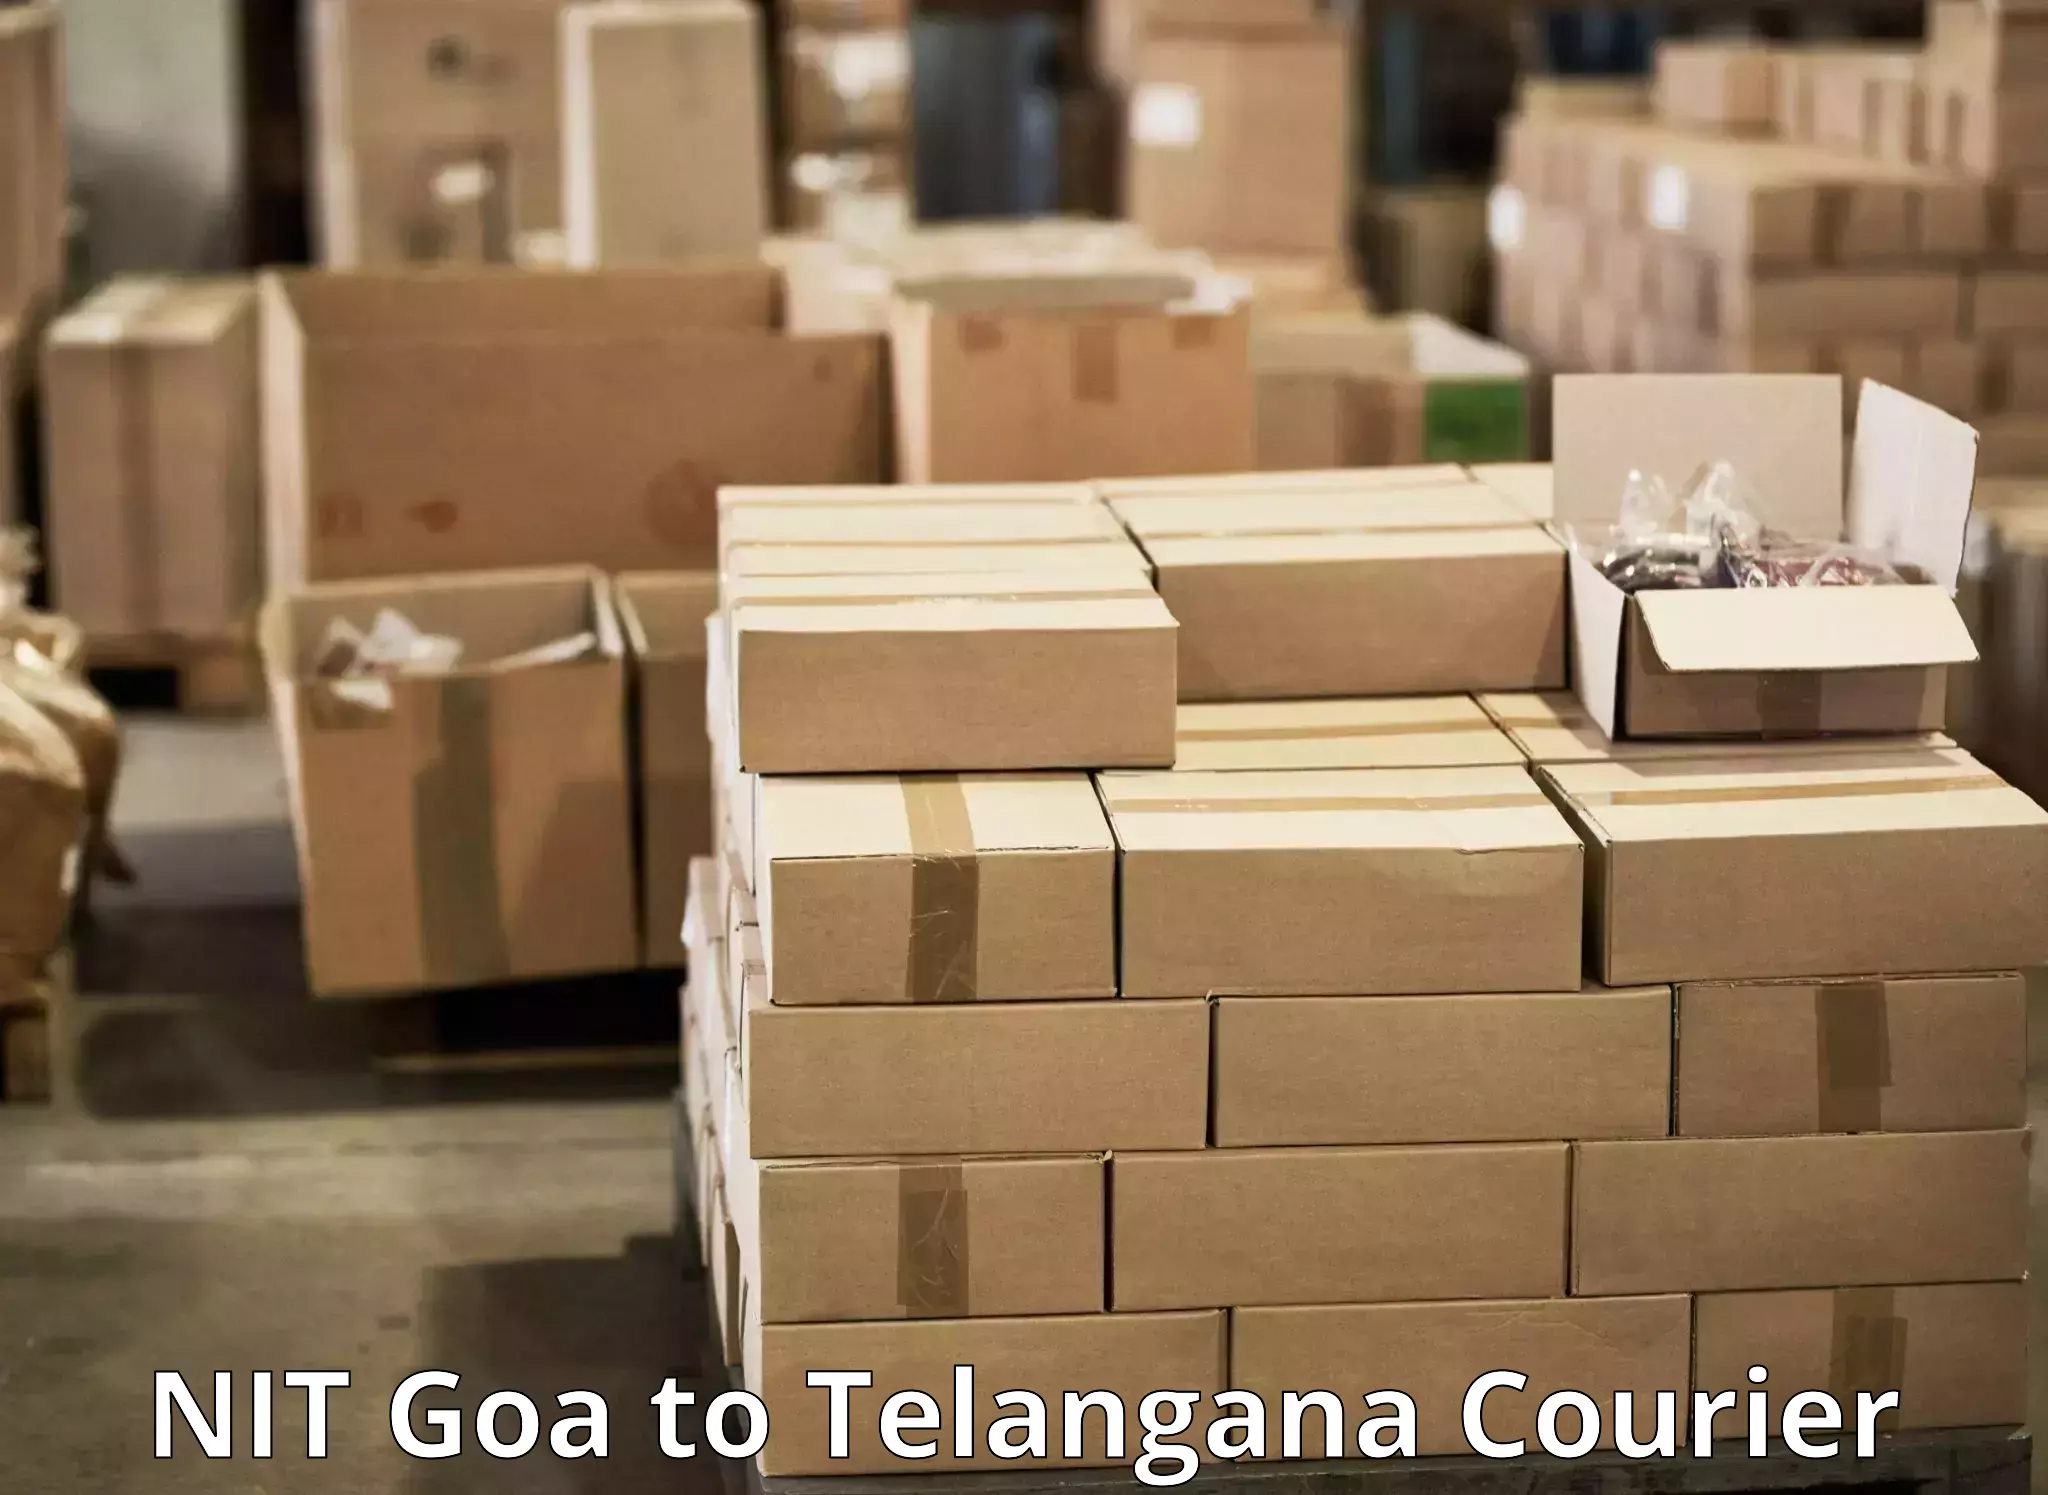 Online package tracking NIT Goa to Vemulawada